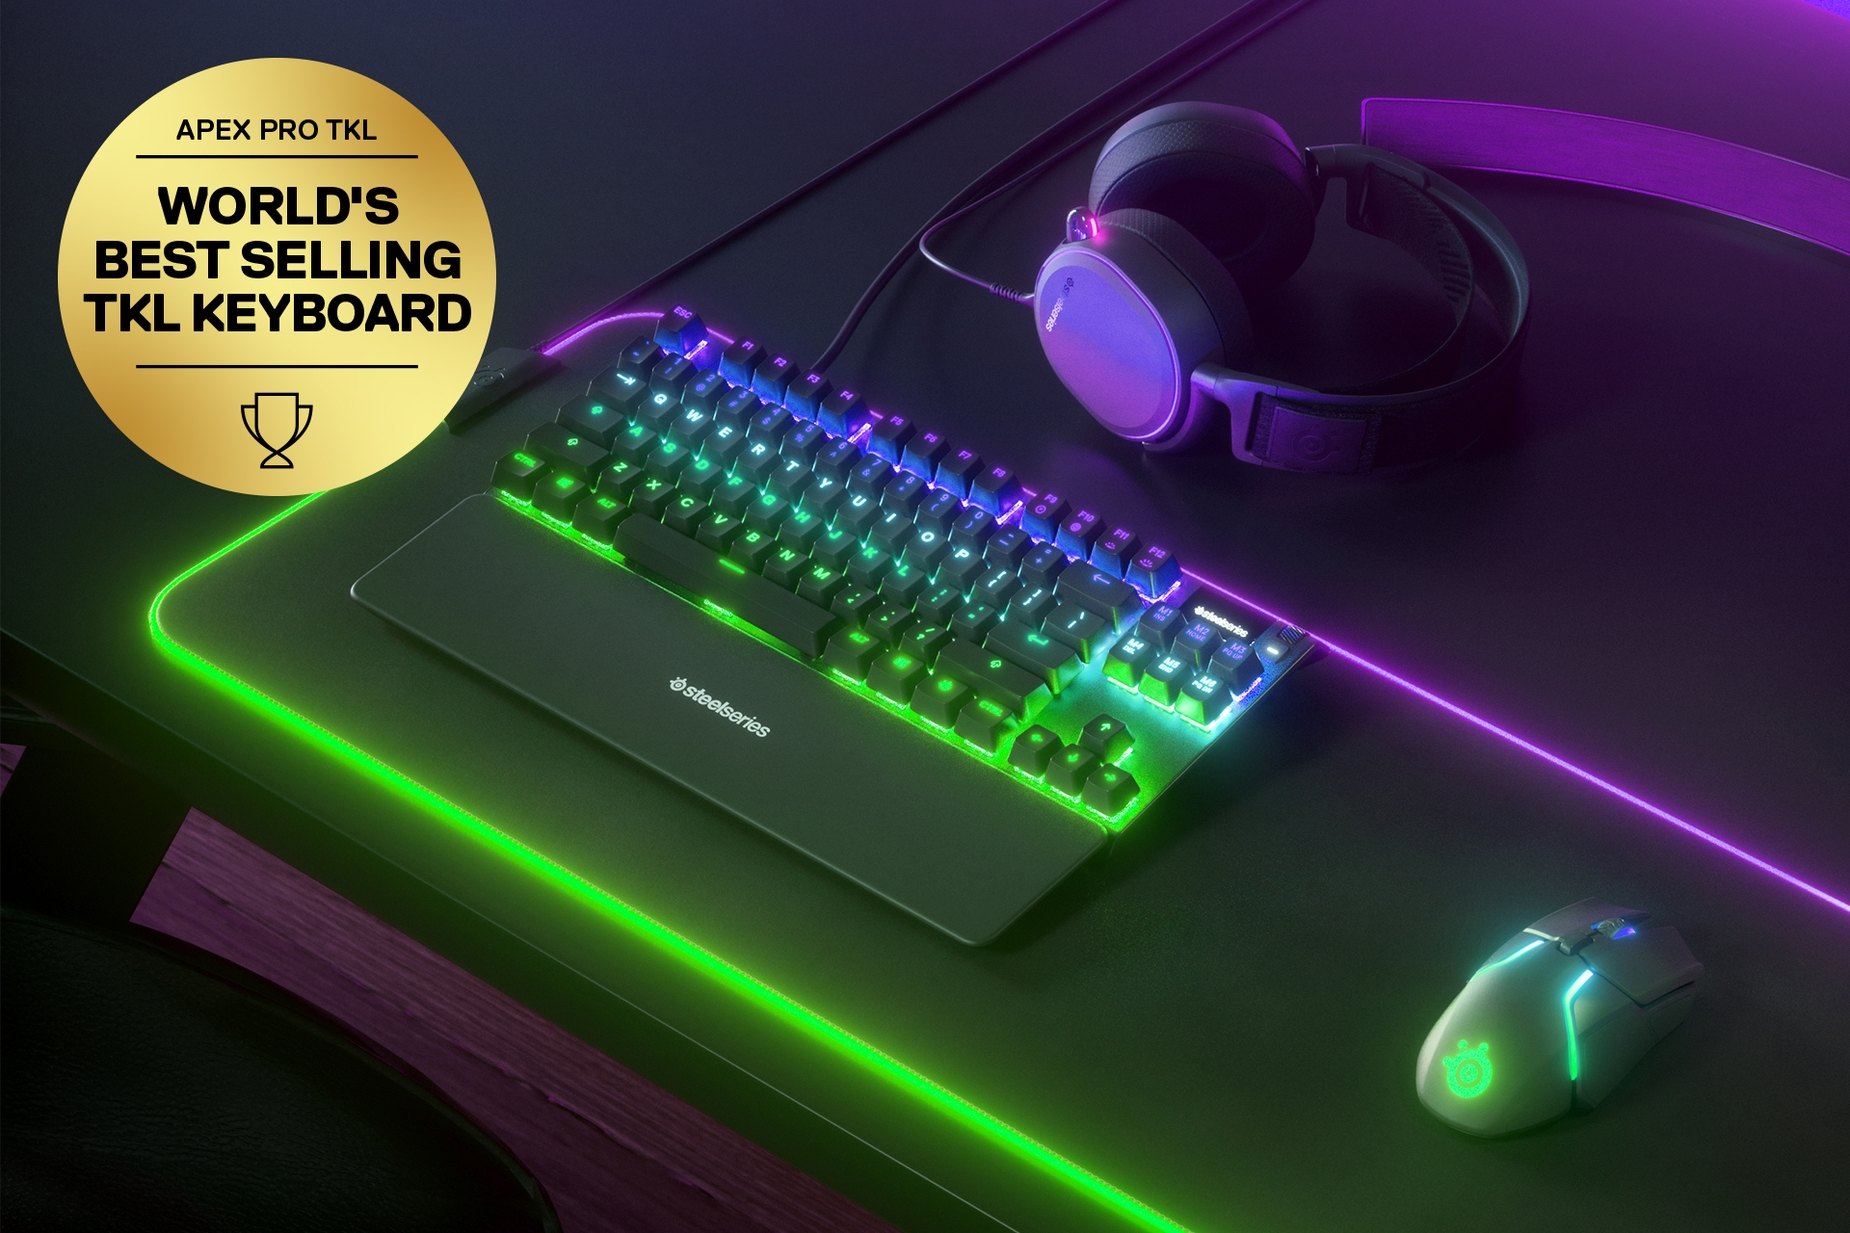 
 German - Apex Pro TKL gaming keyboard on a desk with a gaming mouse, both on top of a large mousepad and a SteelSeries gaming headset next to them. Keyboard has gold award floating next to it with text "World's best selling TKL Keyboard".
 